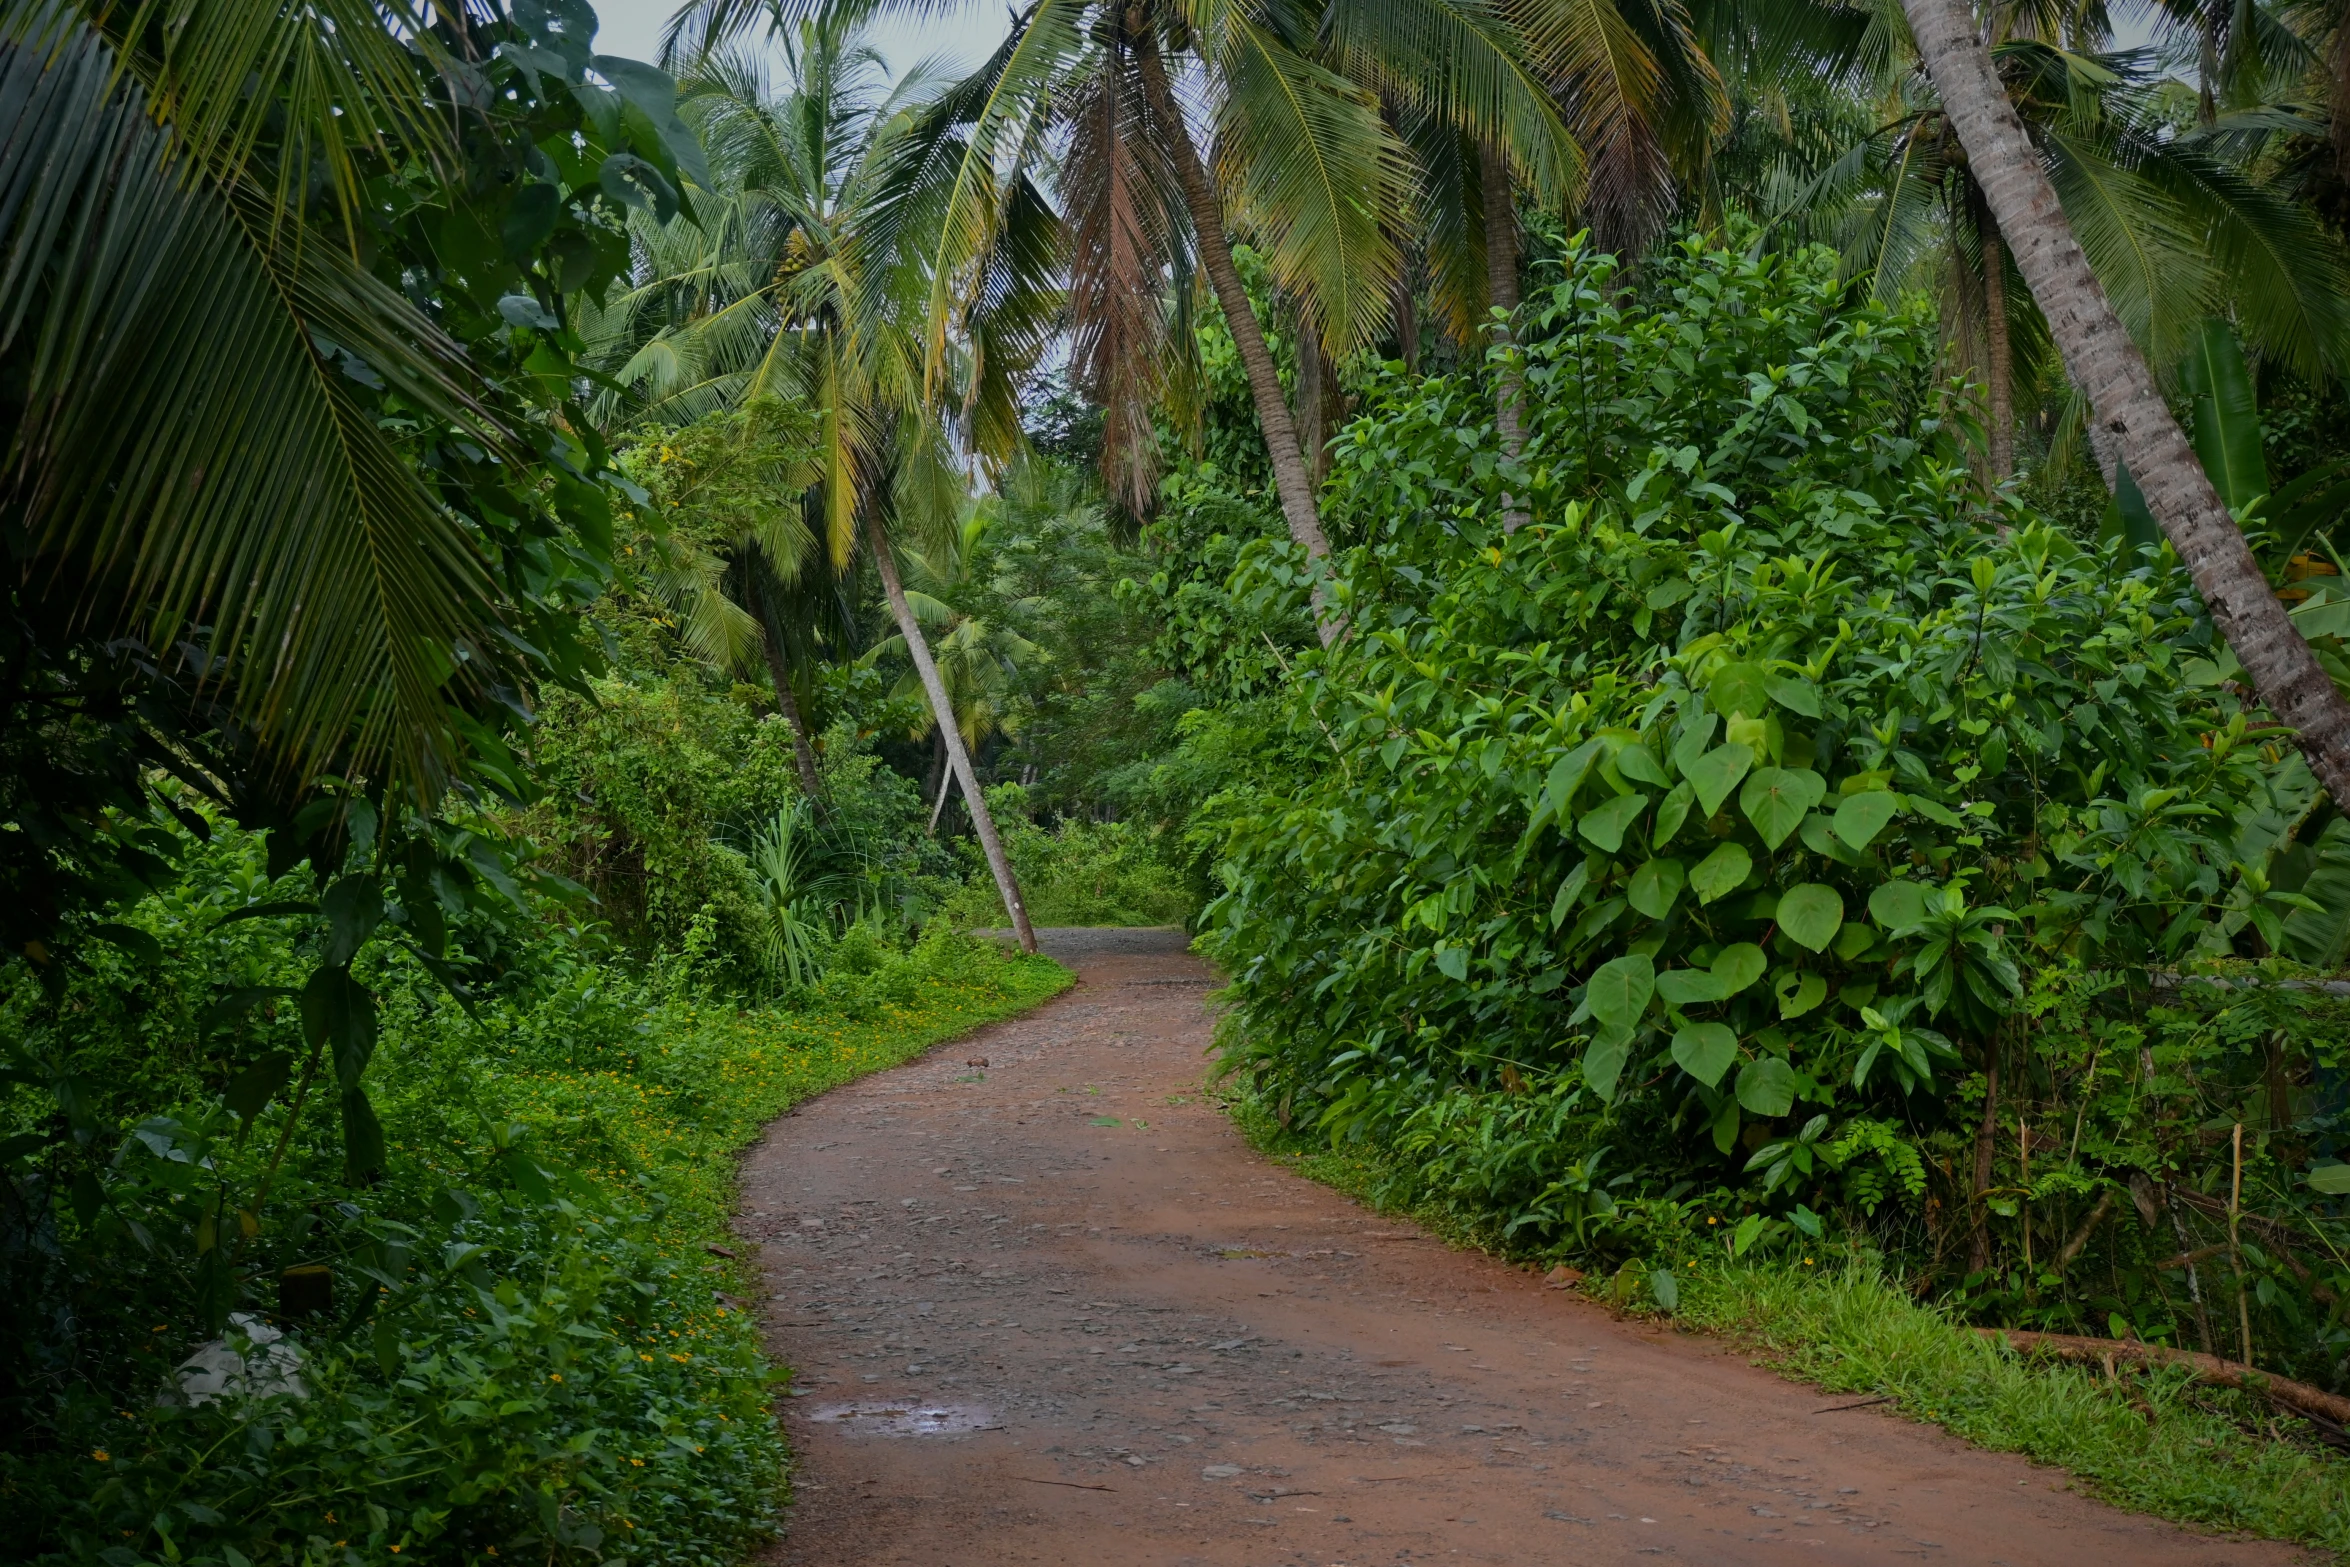 a dirt path with lush vegetation surrounding it